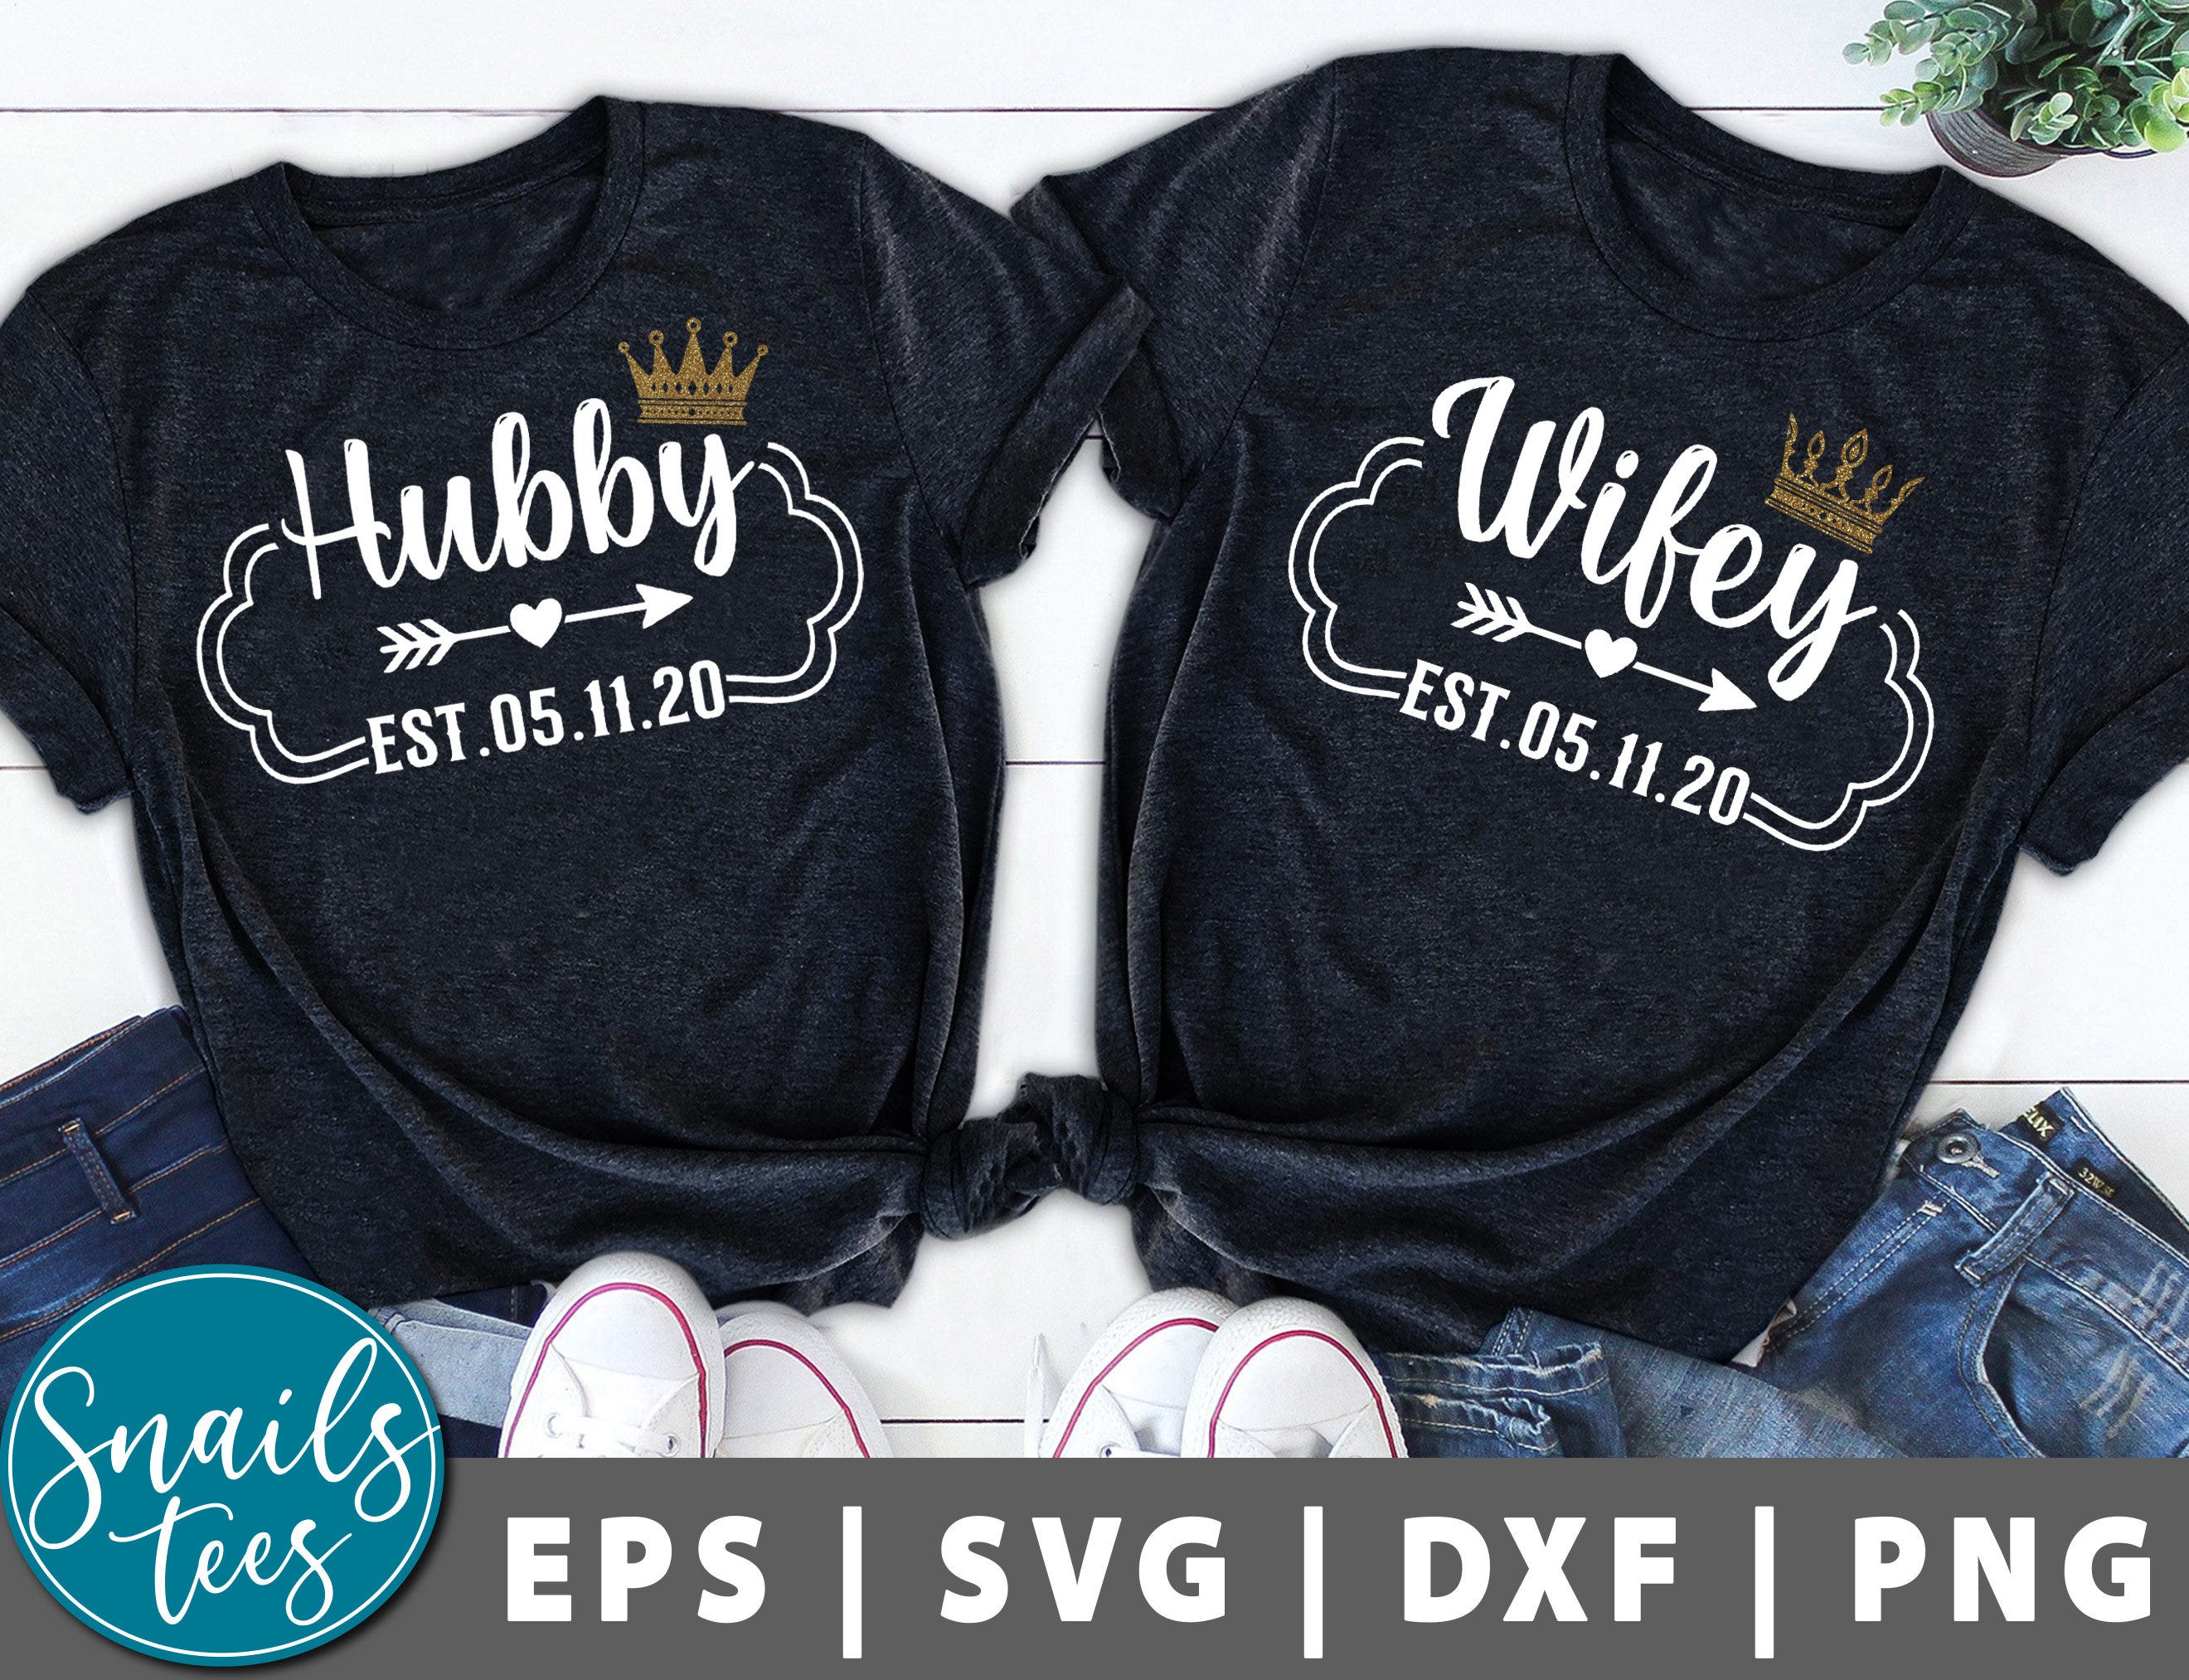 Hubby and Wifey Svg Png Eps Dxf husband and wife svg Customize Your Own Established Date Bride and Groom SVG anniversary svg Wedding Cricut